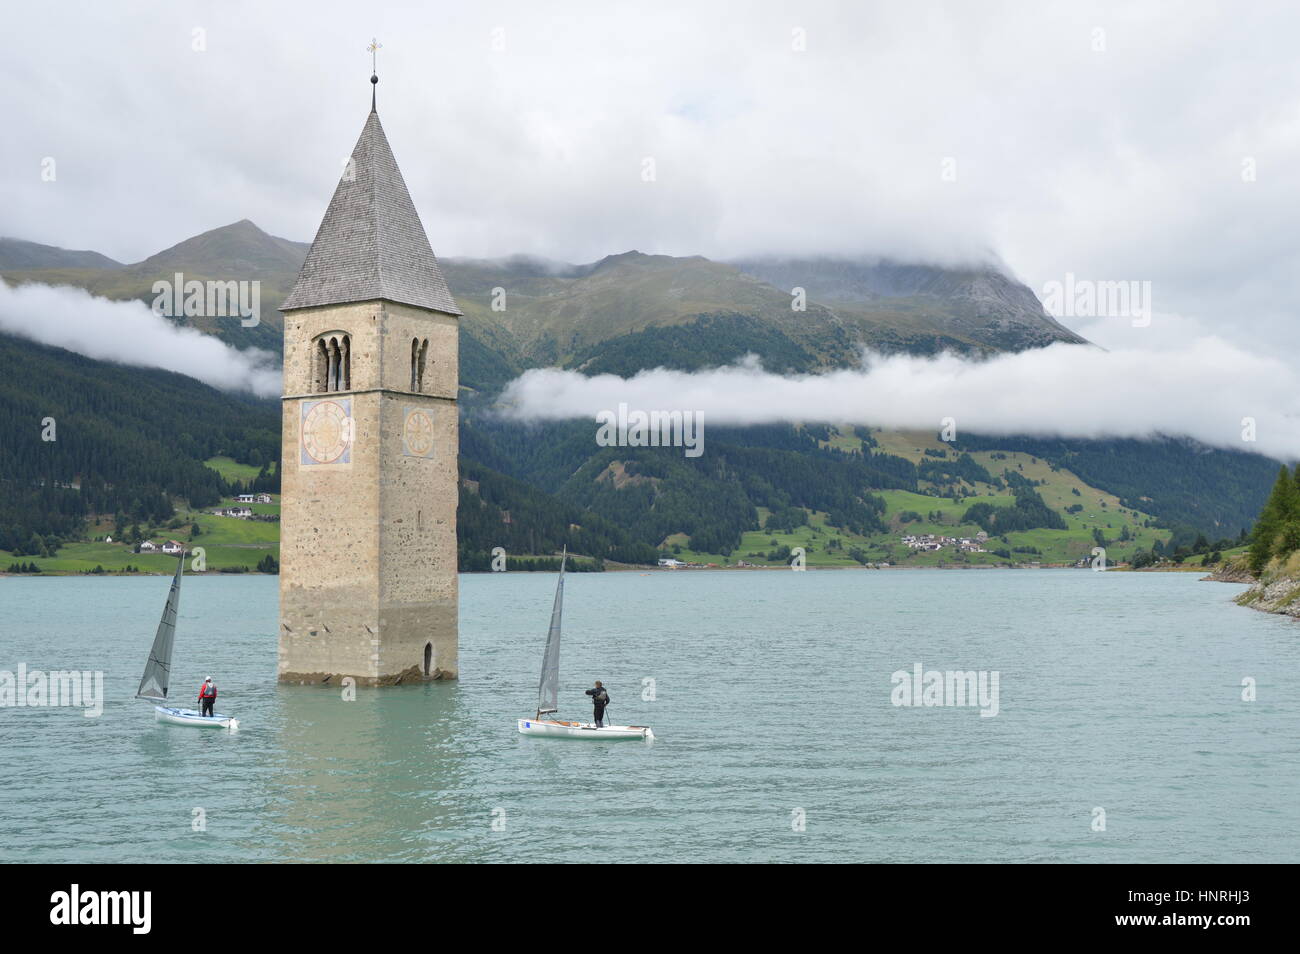 Graun, Italy - August 2, 2015 - 3rd International Open Regatta - Boat race on Rechensee in South Tyrol, Italy, with two sailers Stock Photo